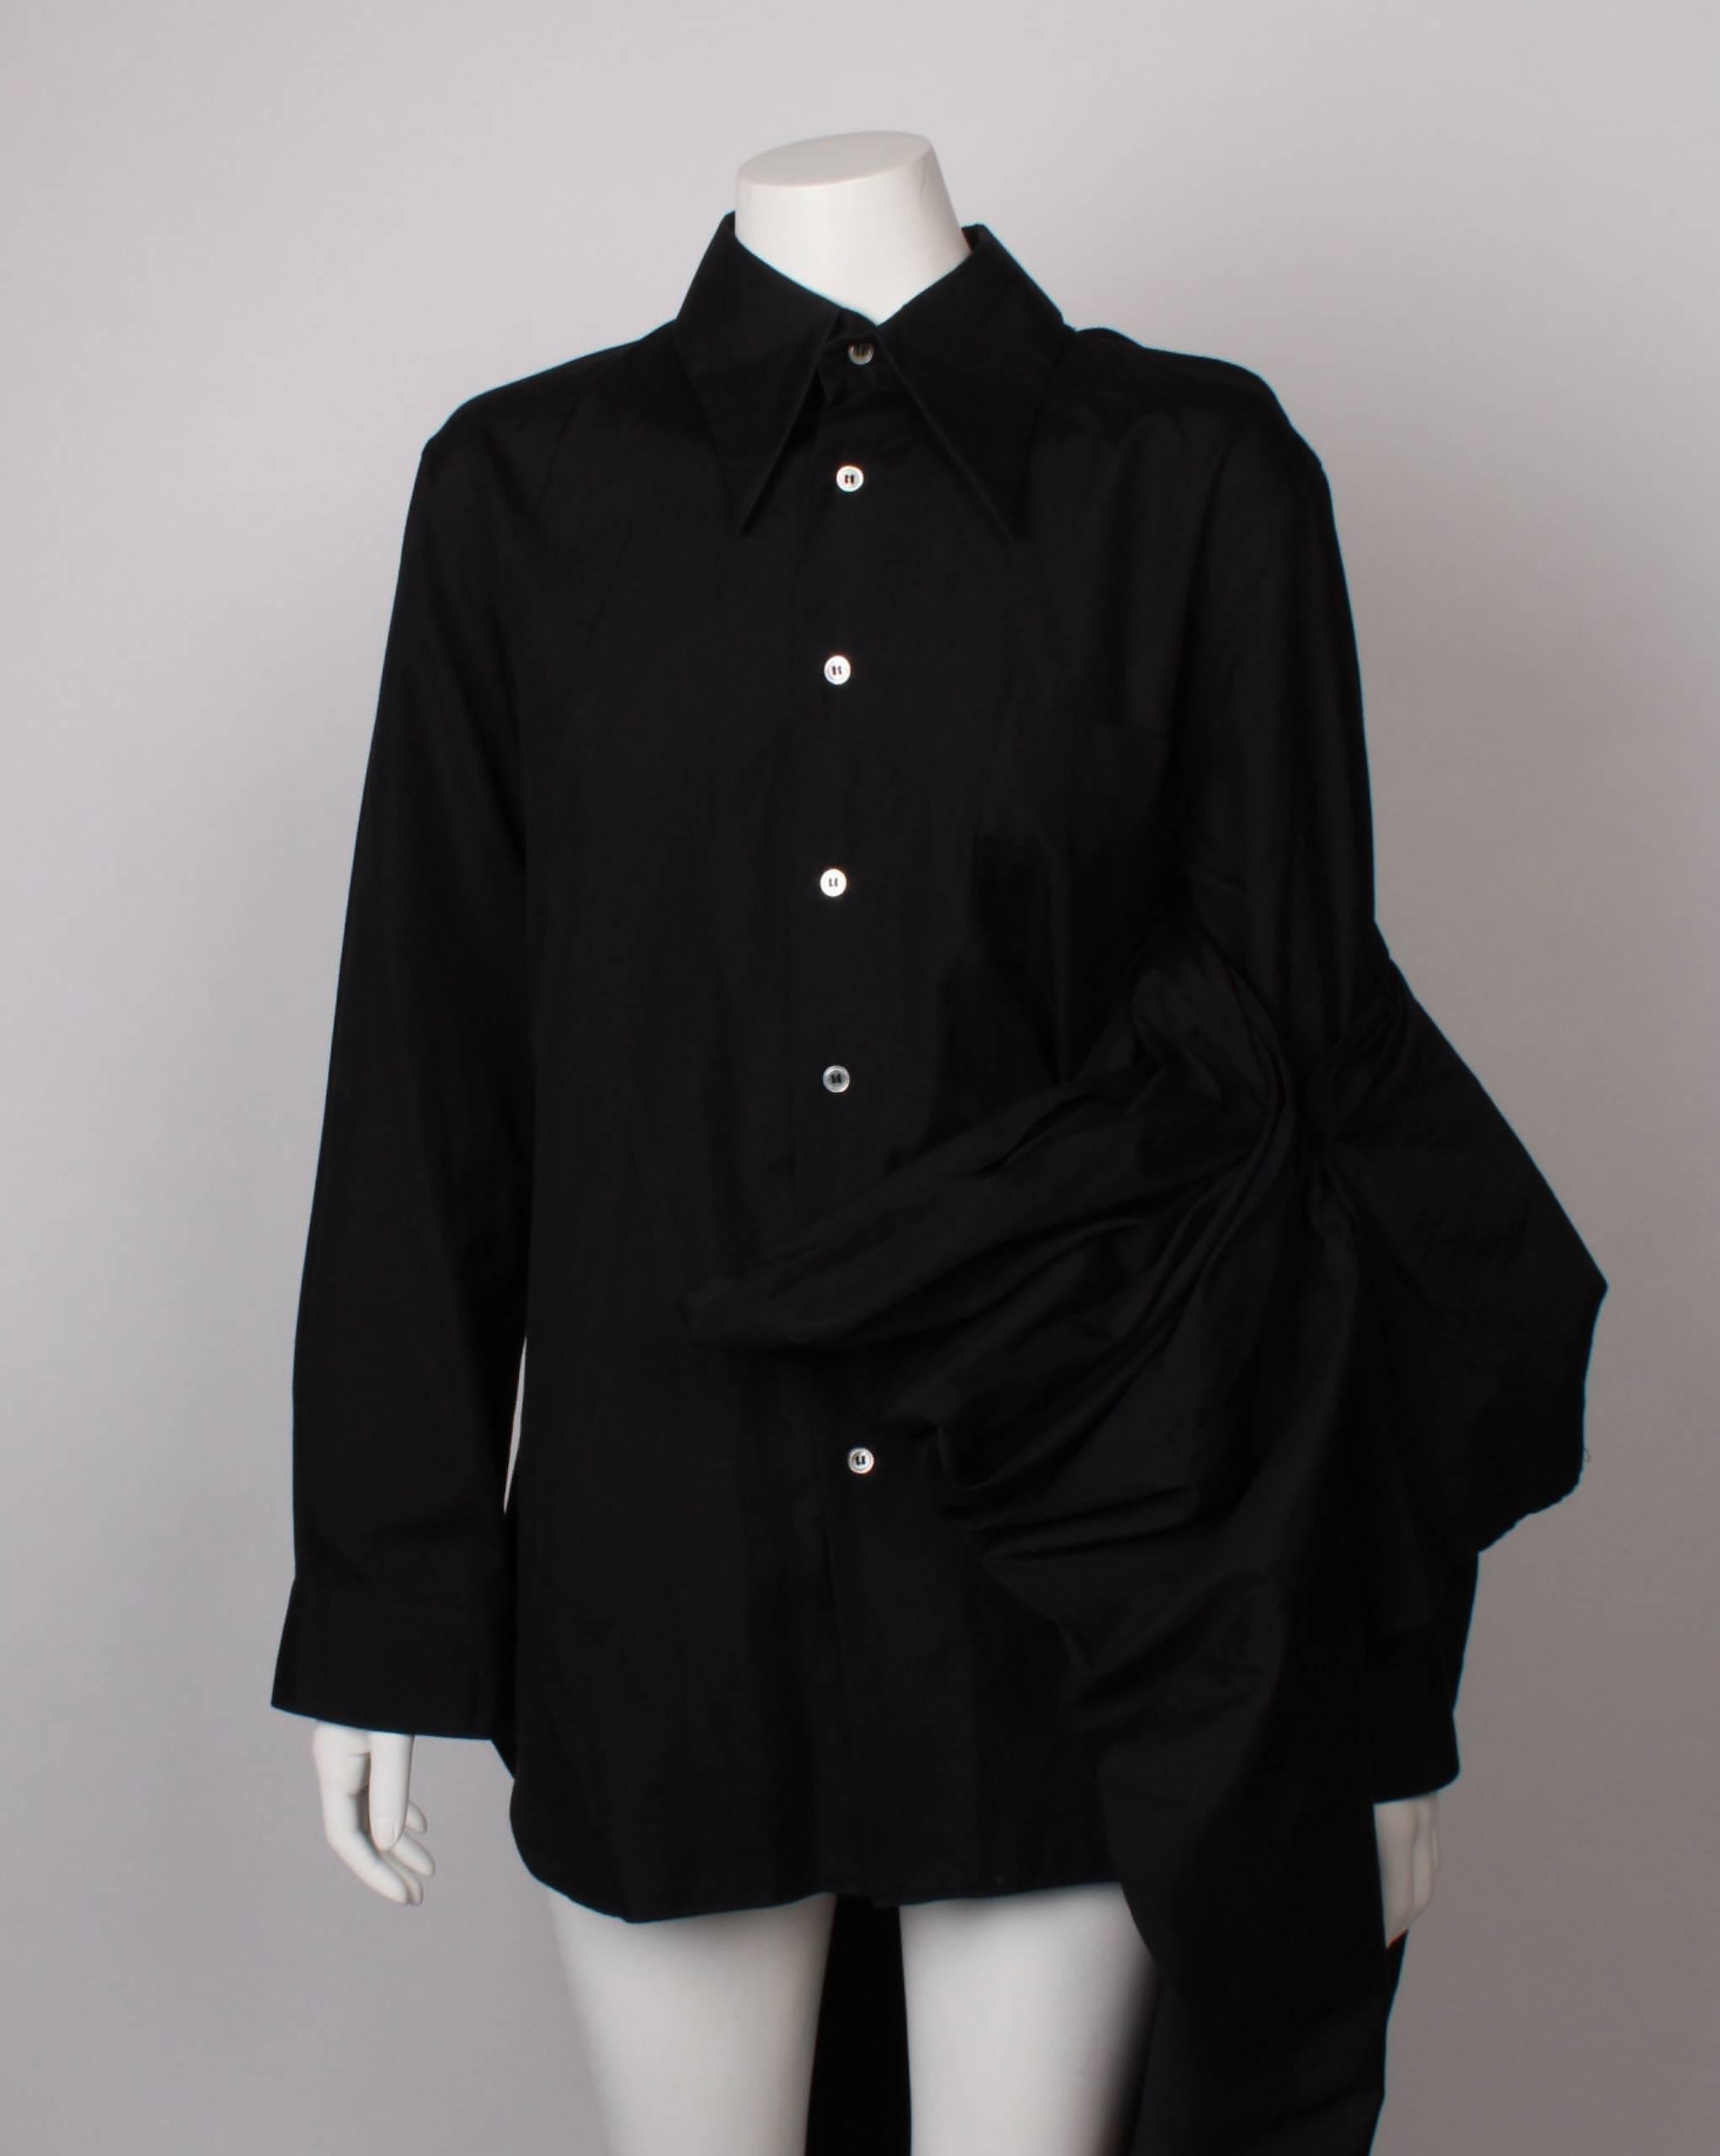 Comme Des Garcons

Peaked collar. Slit in one shoulder. Convertible bustle/wrap/cape that attaches at back of collar. Pearlescent charcoal shirt buttons. One patch breast pocket. 

100% cotton 
Dated: 2003AD

Length of shirt - 75cm
Total length of